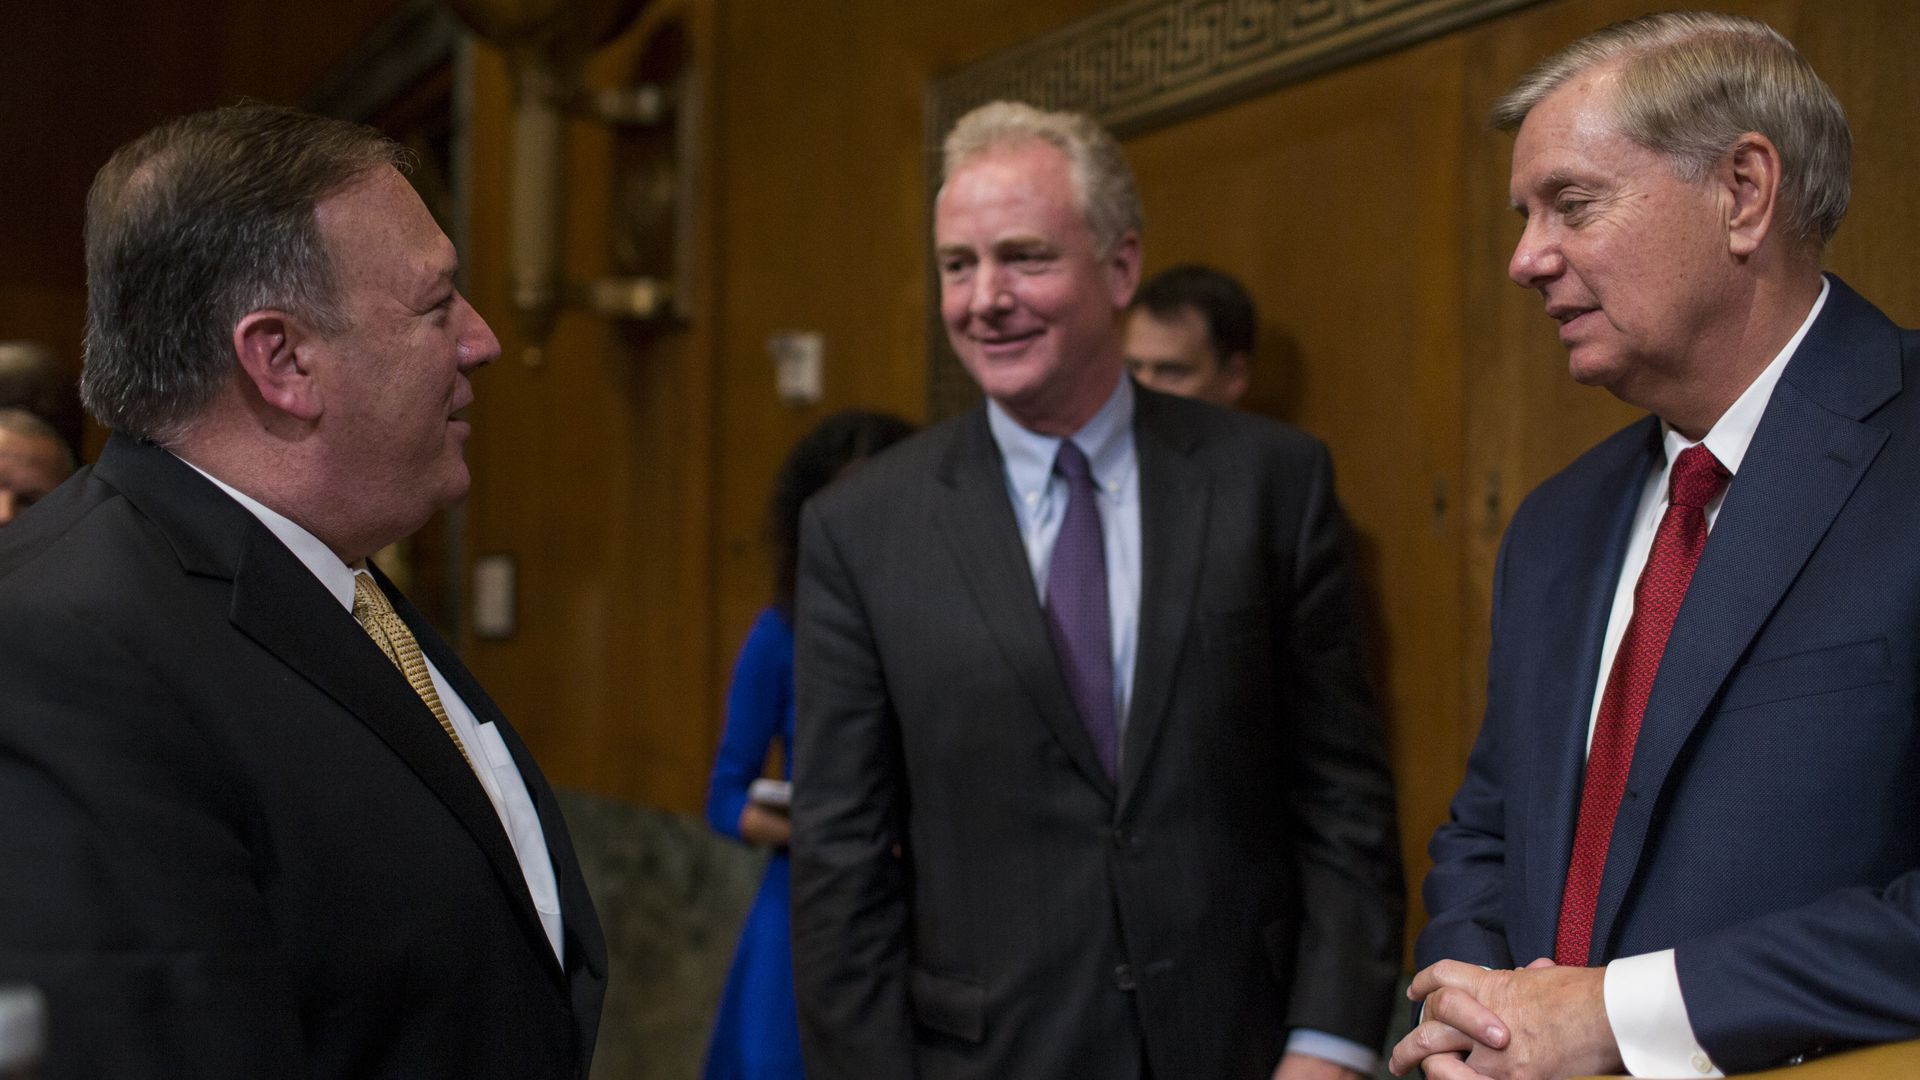 Chris van Hollen and Lindsey Graham with Mike Pompeo